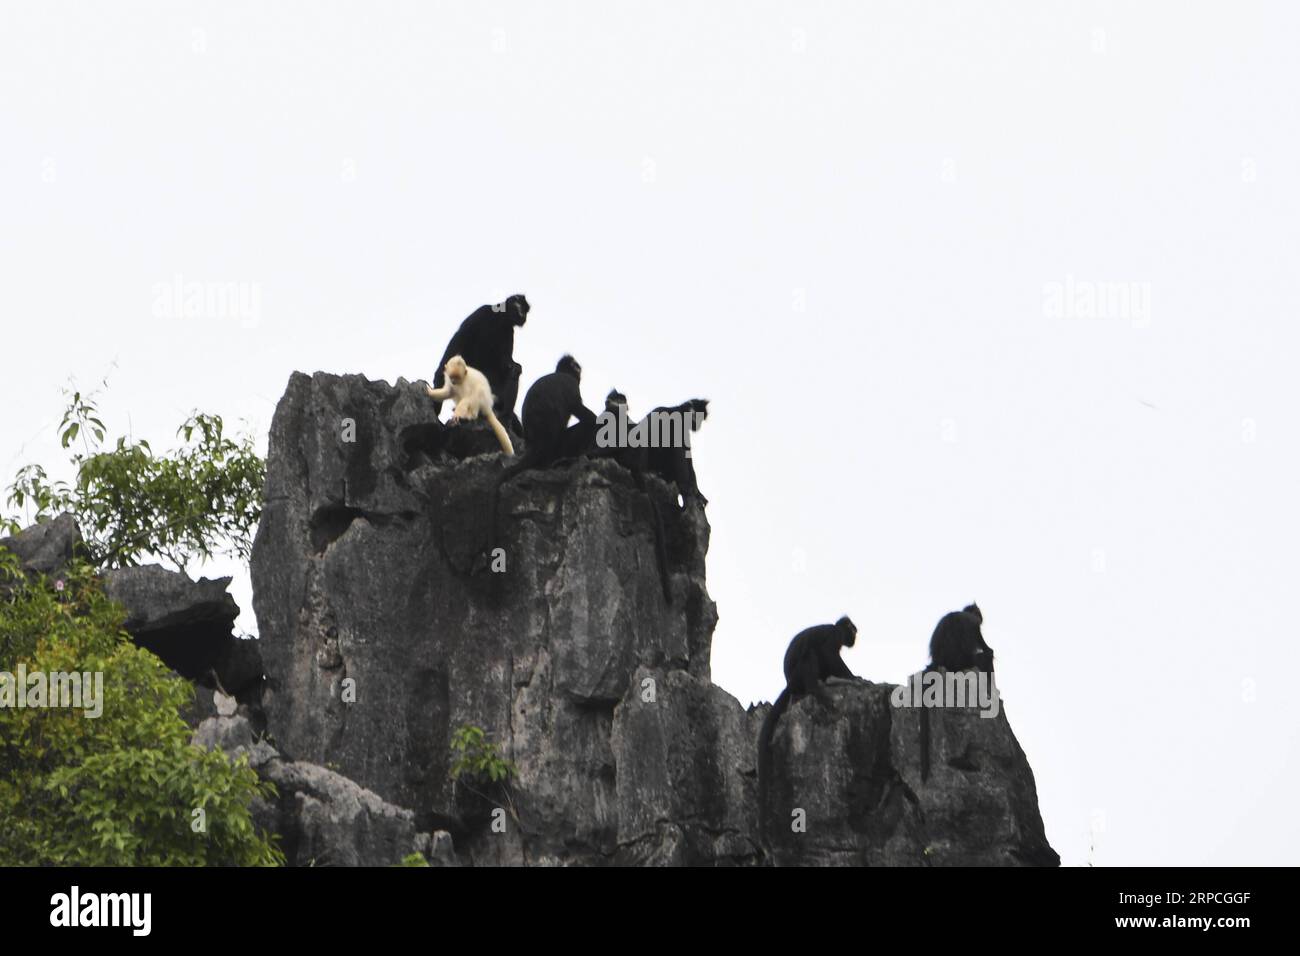 (190704) -- DAXIN, July 4, 2019 -- An albino baby Francois langur and other Francois langurs are seen on a mountain at Baoxin Village in Daxin County, south China s Guangxi Zhuang Autonomous Region, July 4, 2019. The second albino Francois langur was discovered Thursday in Guangxi since 2017 when the first was observed. At present, there are less than 2,000 Francois langurs worldwide. In China, they are found in Guangxi, Guizhou and Chongqing. Also known as Francois leaf monkeys, the species is one of China s most endangered wild animals and is under top national-level protection. ) CHINA-GUAN Stock Photo